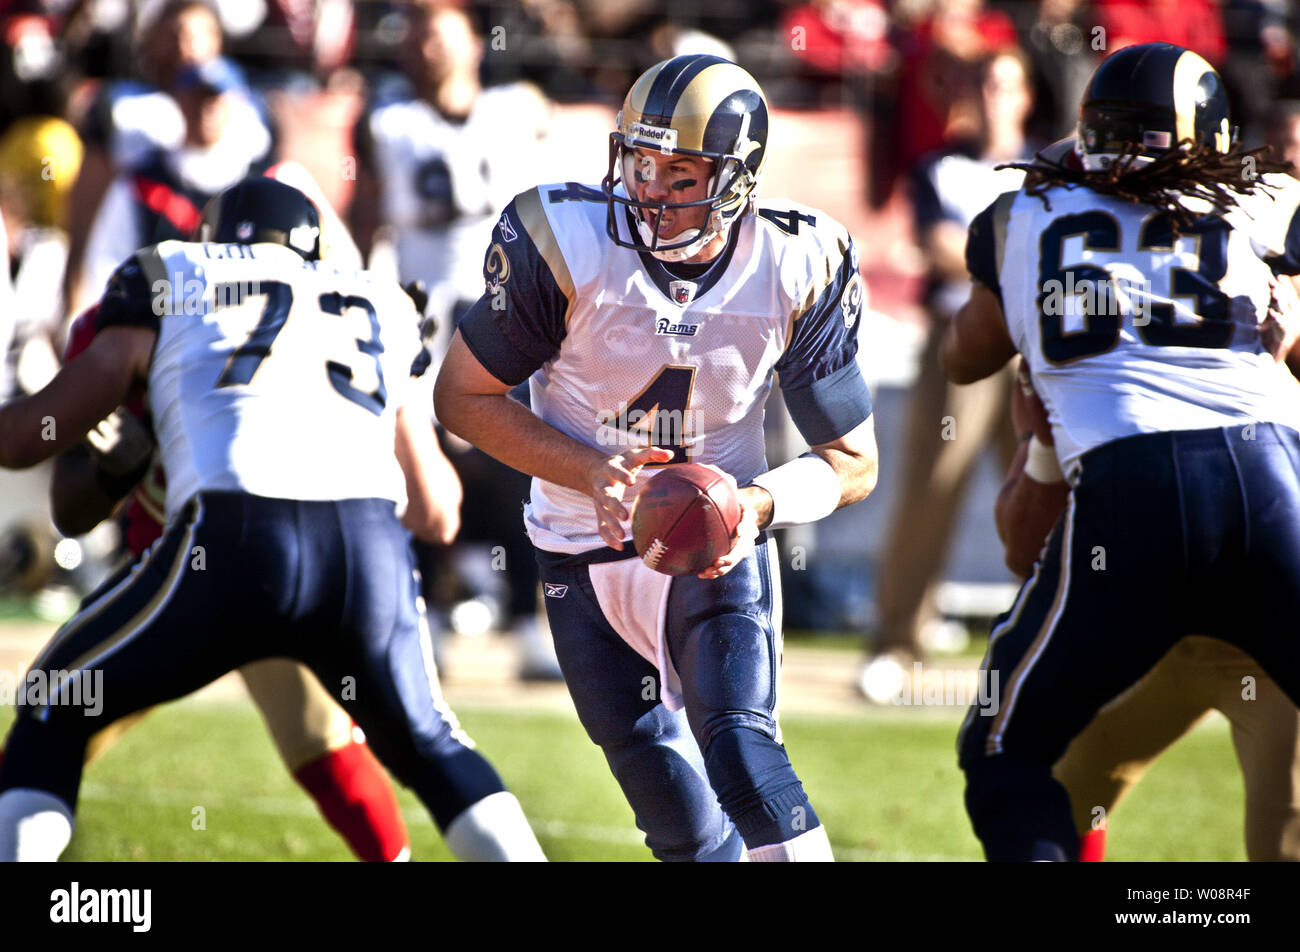 St. Louis Rams QB A.J. Feeley (4) moves through the pocket against the San Francisco 49ers at Candlestick Park in San Francisco on December 4, 2011. The 49ers defeated the Rams 26-0 to clinch the NFC West.  UPI/Terry Schmitt Stock Photo